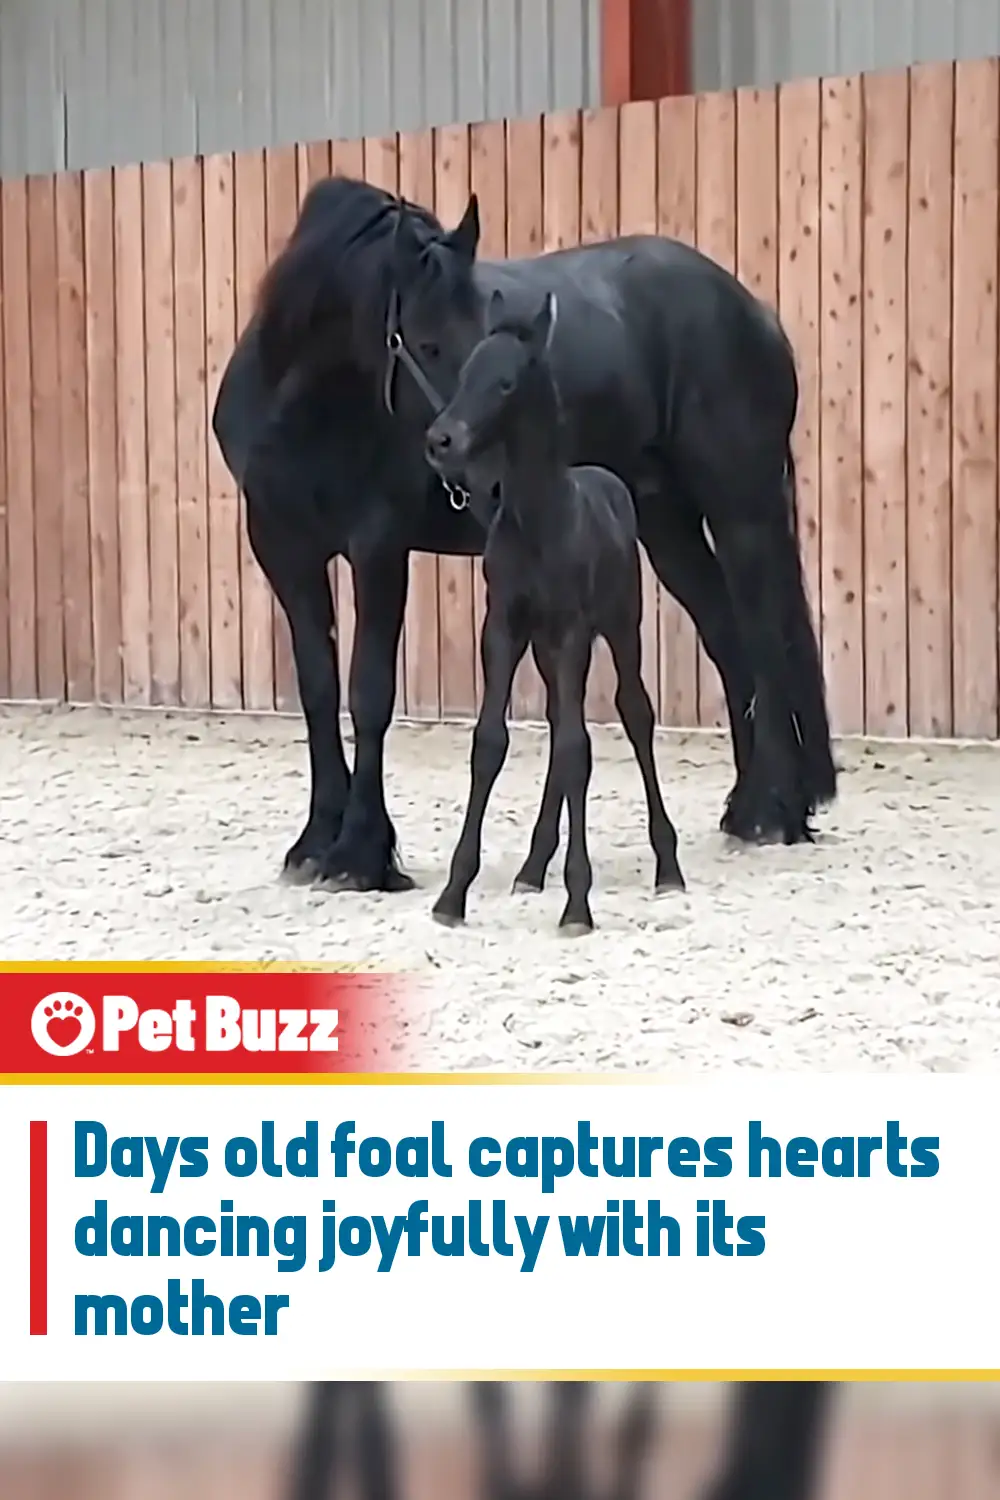 Days old foal captures hearts dancing joyfully with its mother